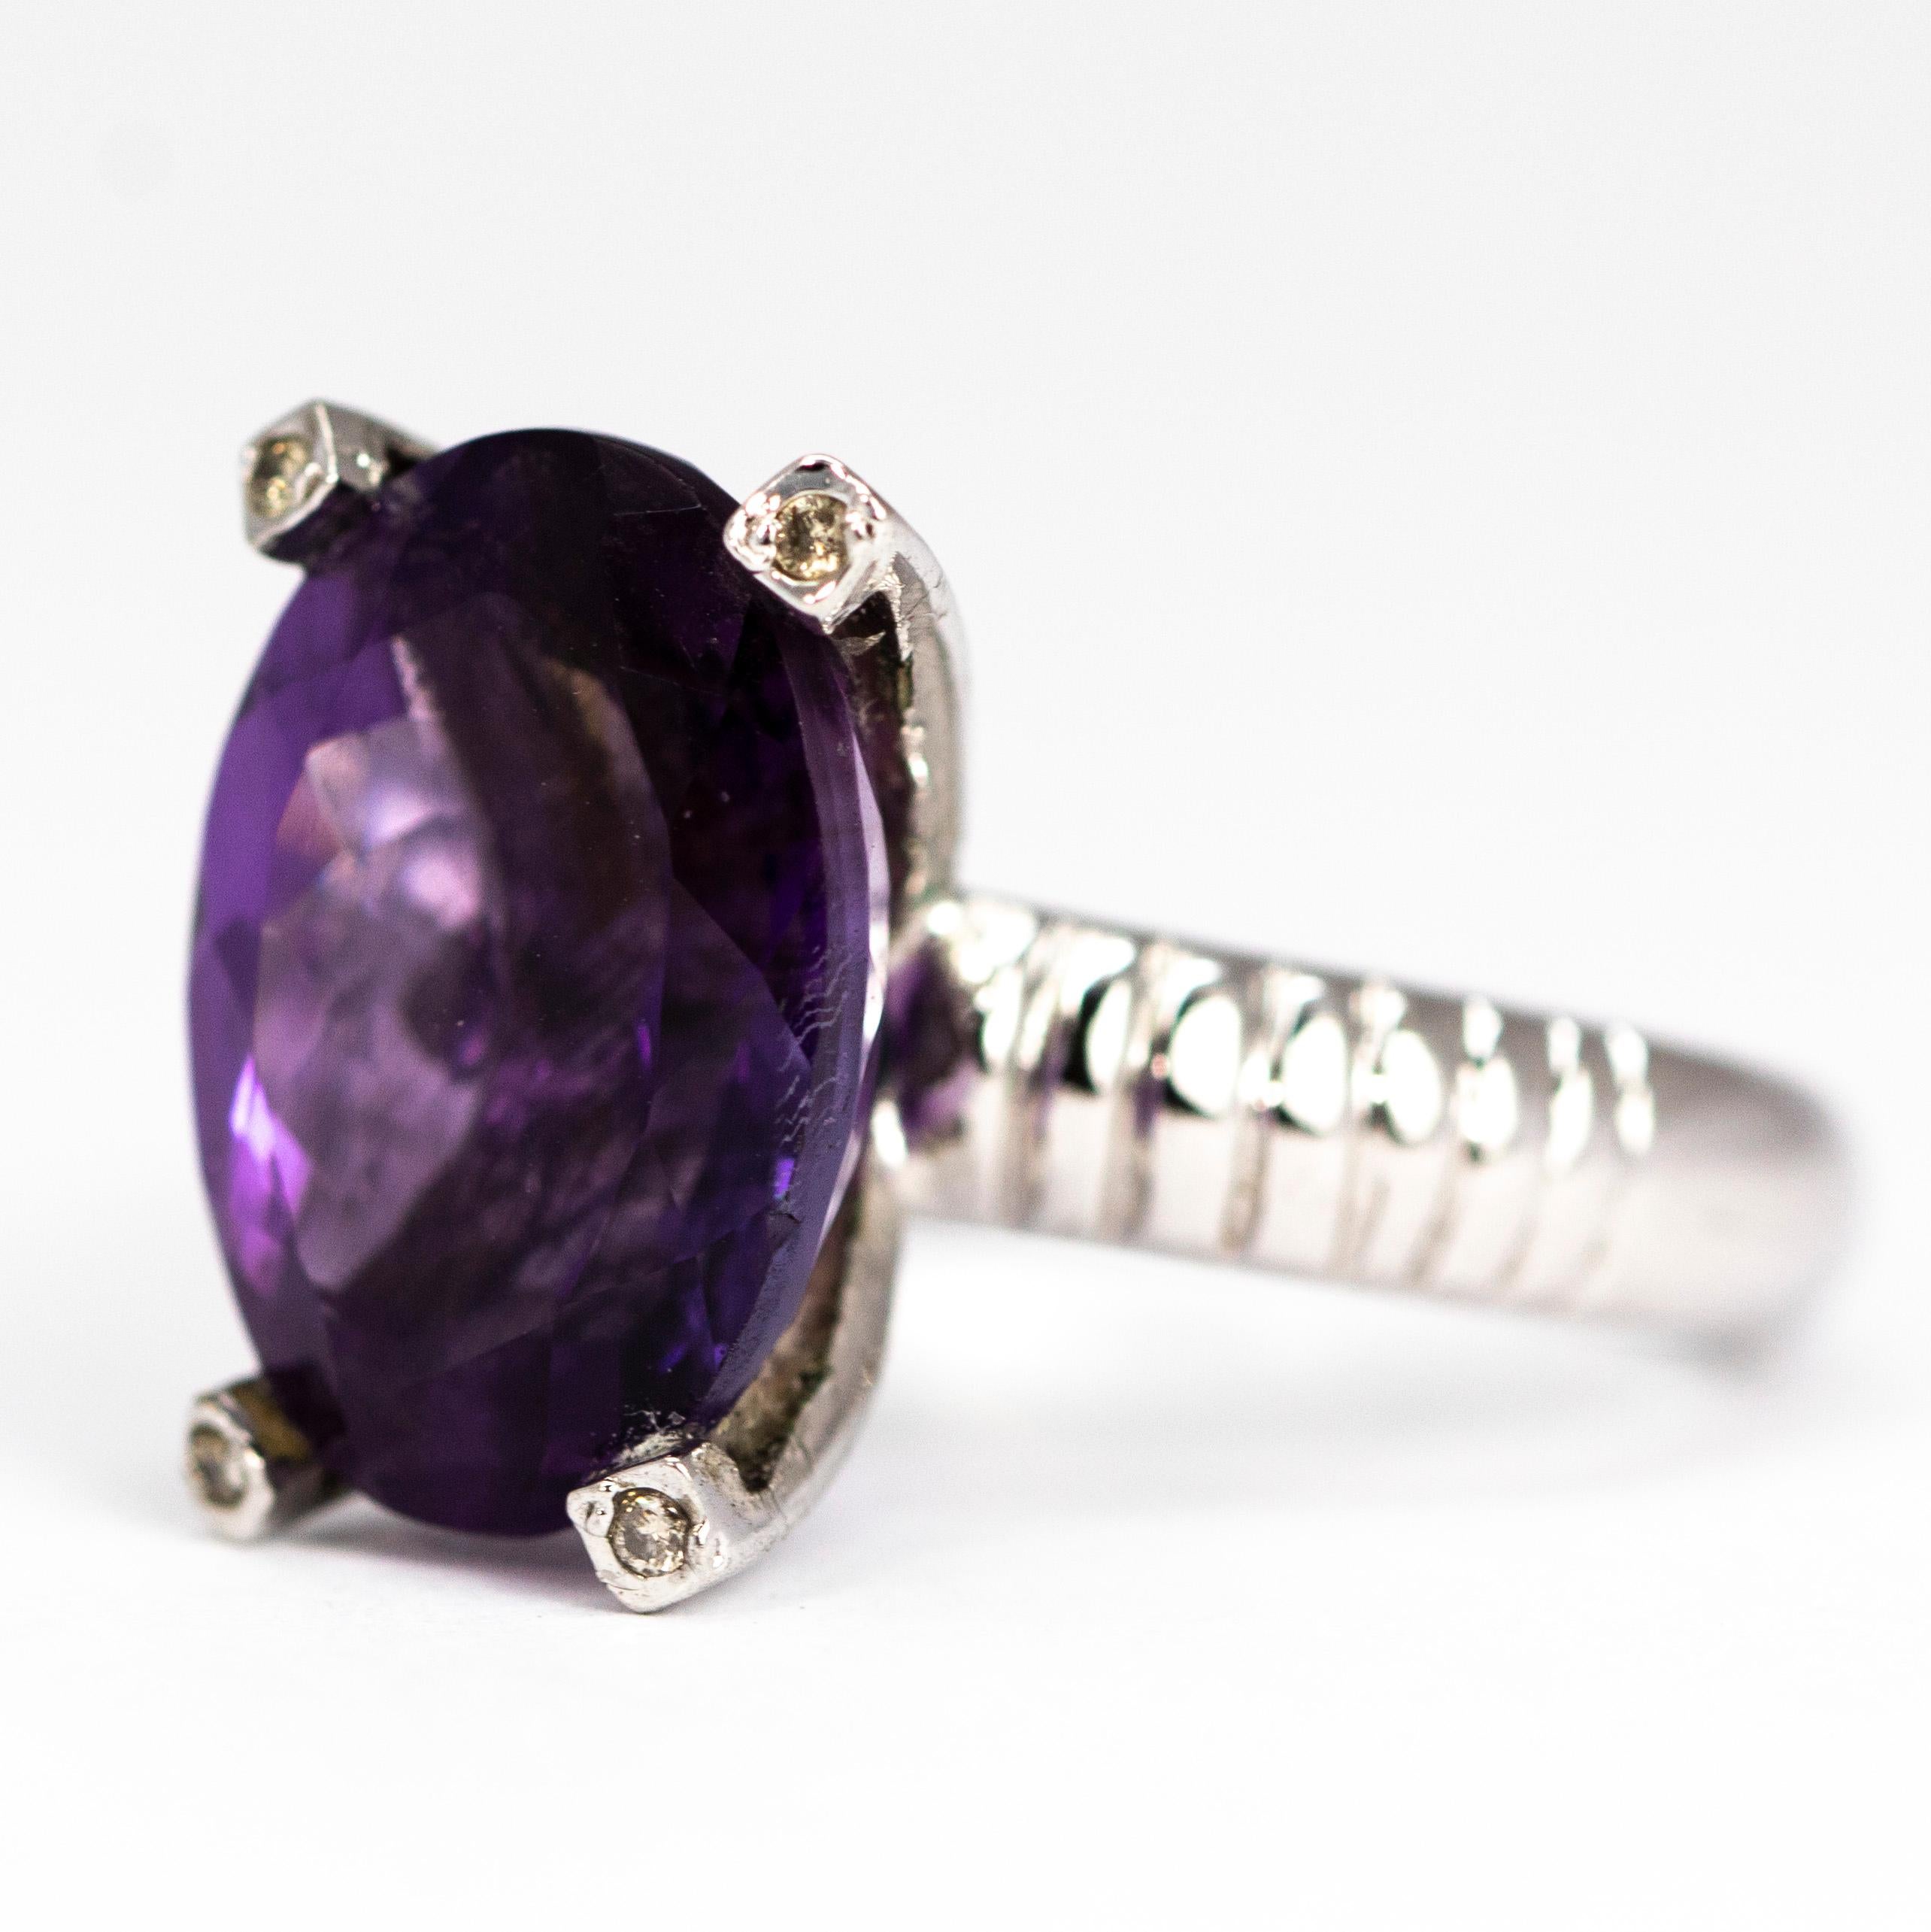 This stunning amethyst sits proudly on a simple four claw setting modelled out of silver and has ribbed shoulders. On the tip of each claw is a diamond point which adds a lovely bit of sparkle. 

Ring Size: P 1/2 or 8
Stone Dimensions: 11 x 16.5mm